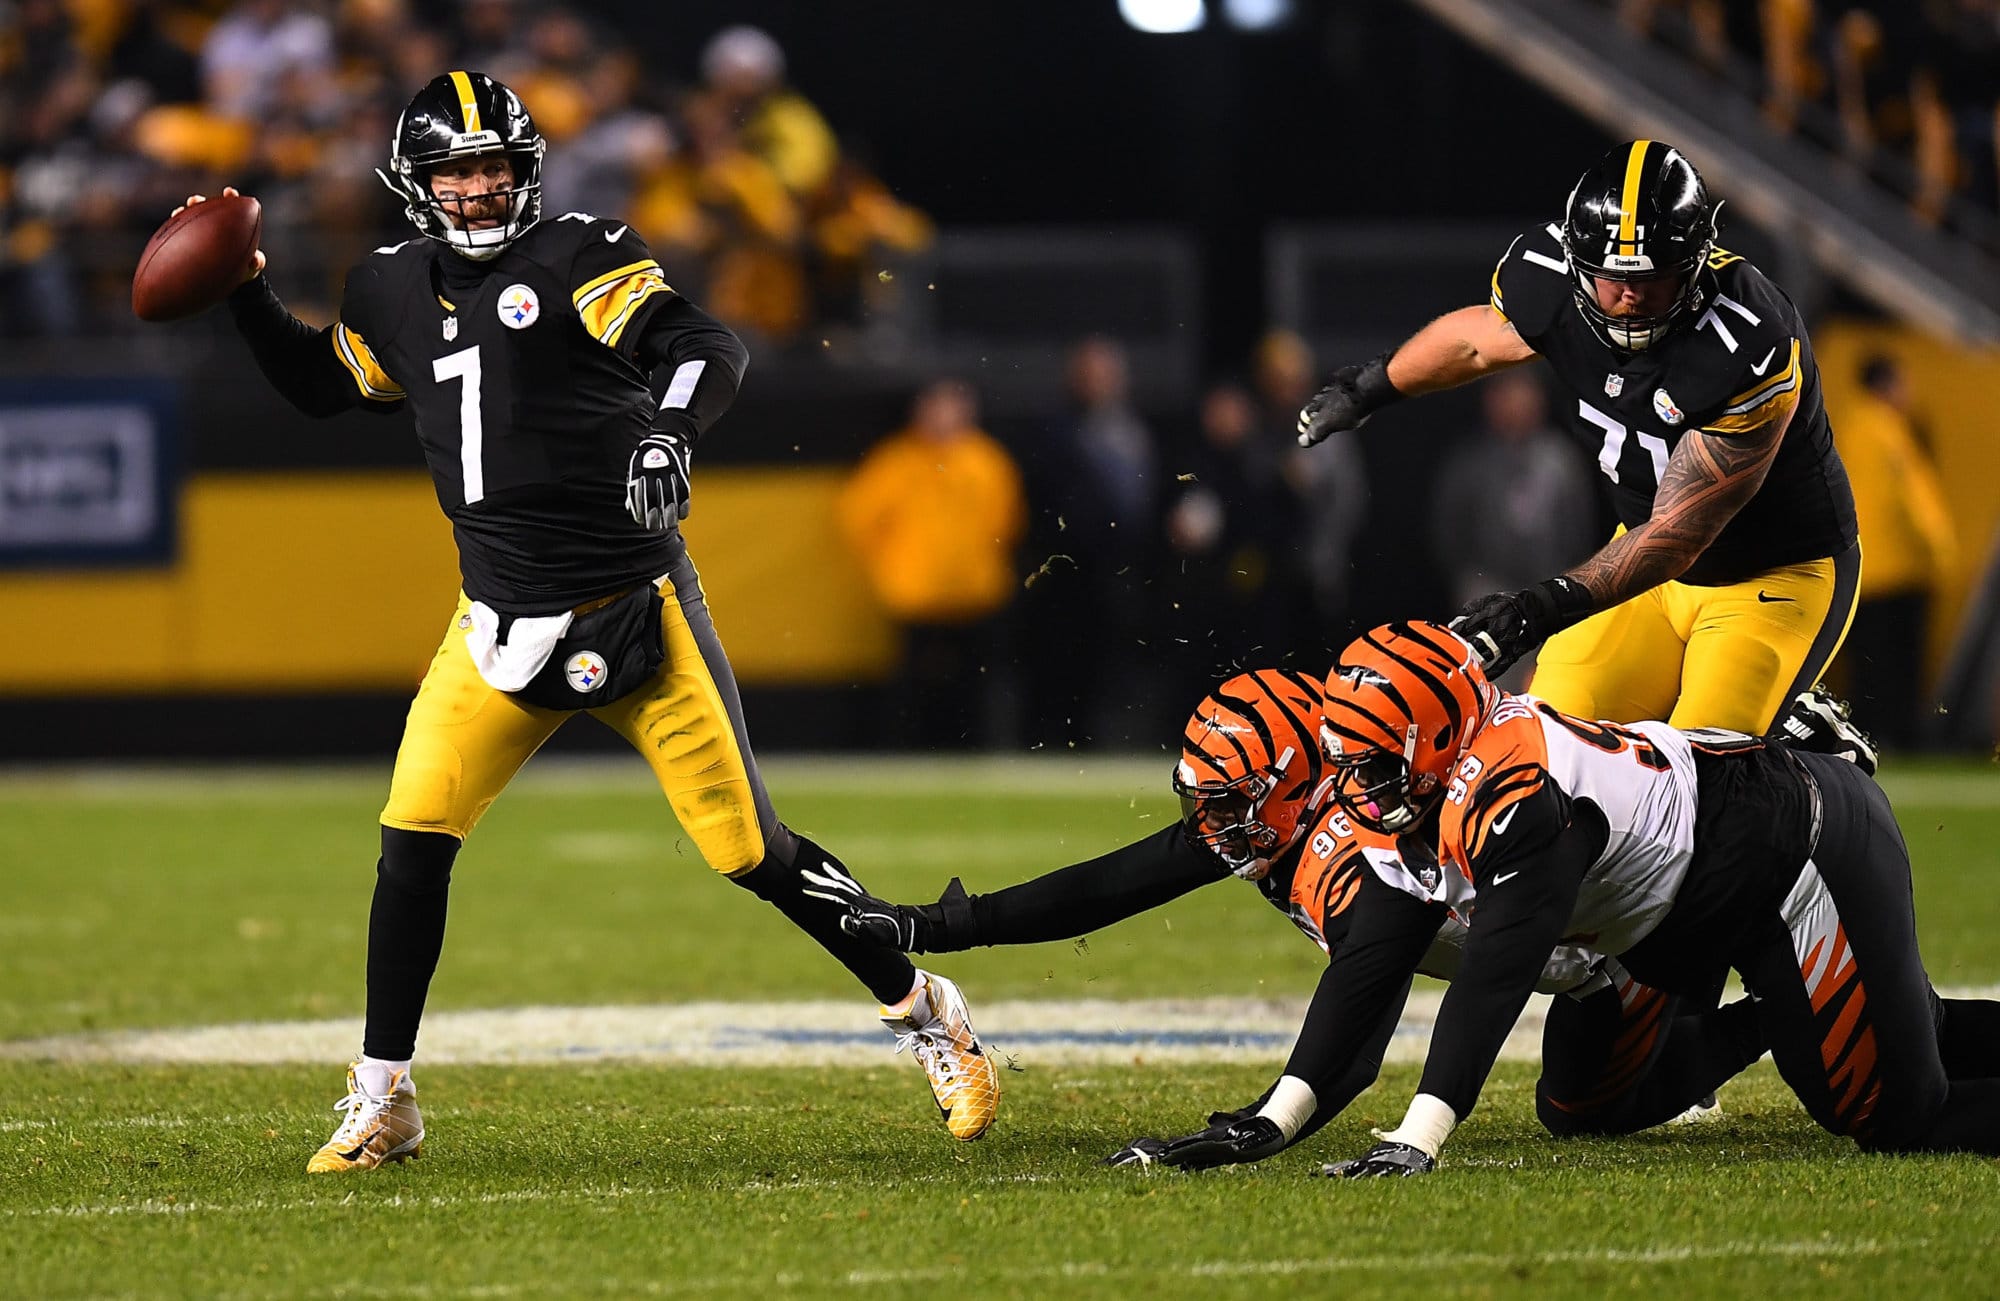 PITTSBURGH, PA - DECEMBER 30: Ben Roethlisberger #7 of the Pittsburgh Steelers attempts a pass under pressure in the second half during the game against the Cincinnati Bengals at Heinz Field on December 30, 2018 in Pittsburgh, Pennsylvania. (Photo by Joe Sargent/Getty Images)